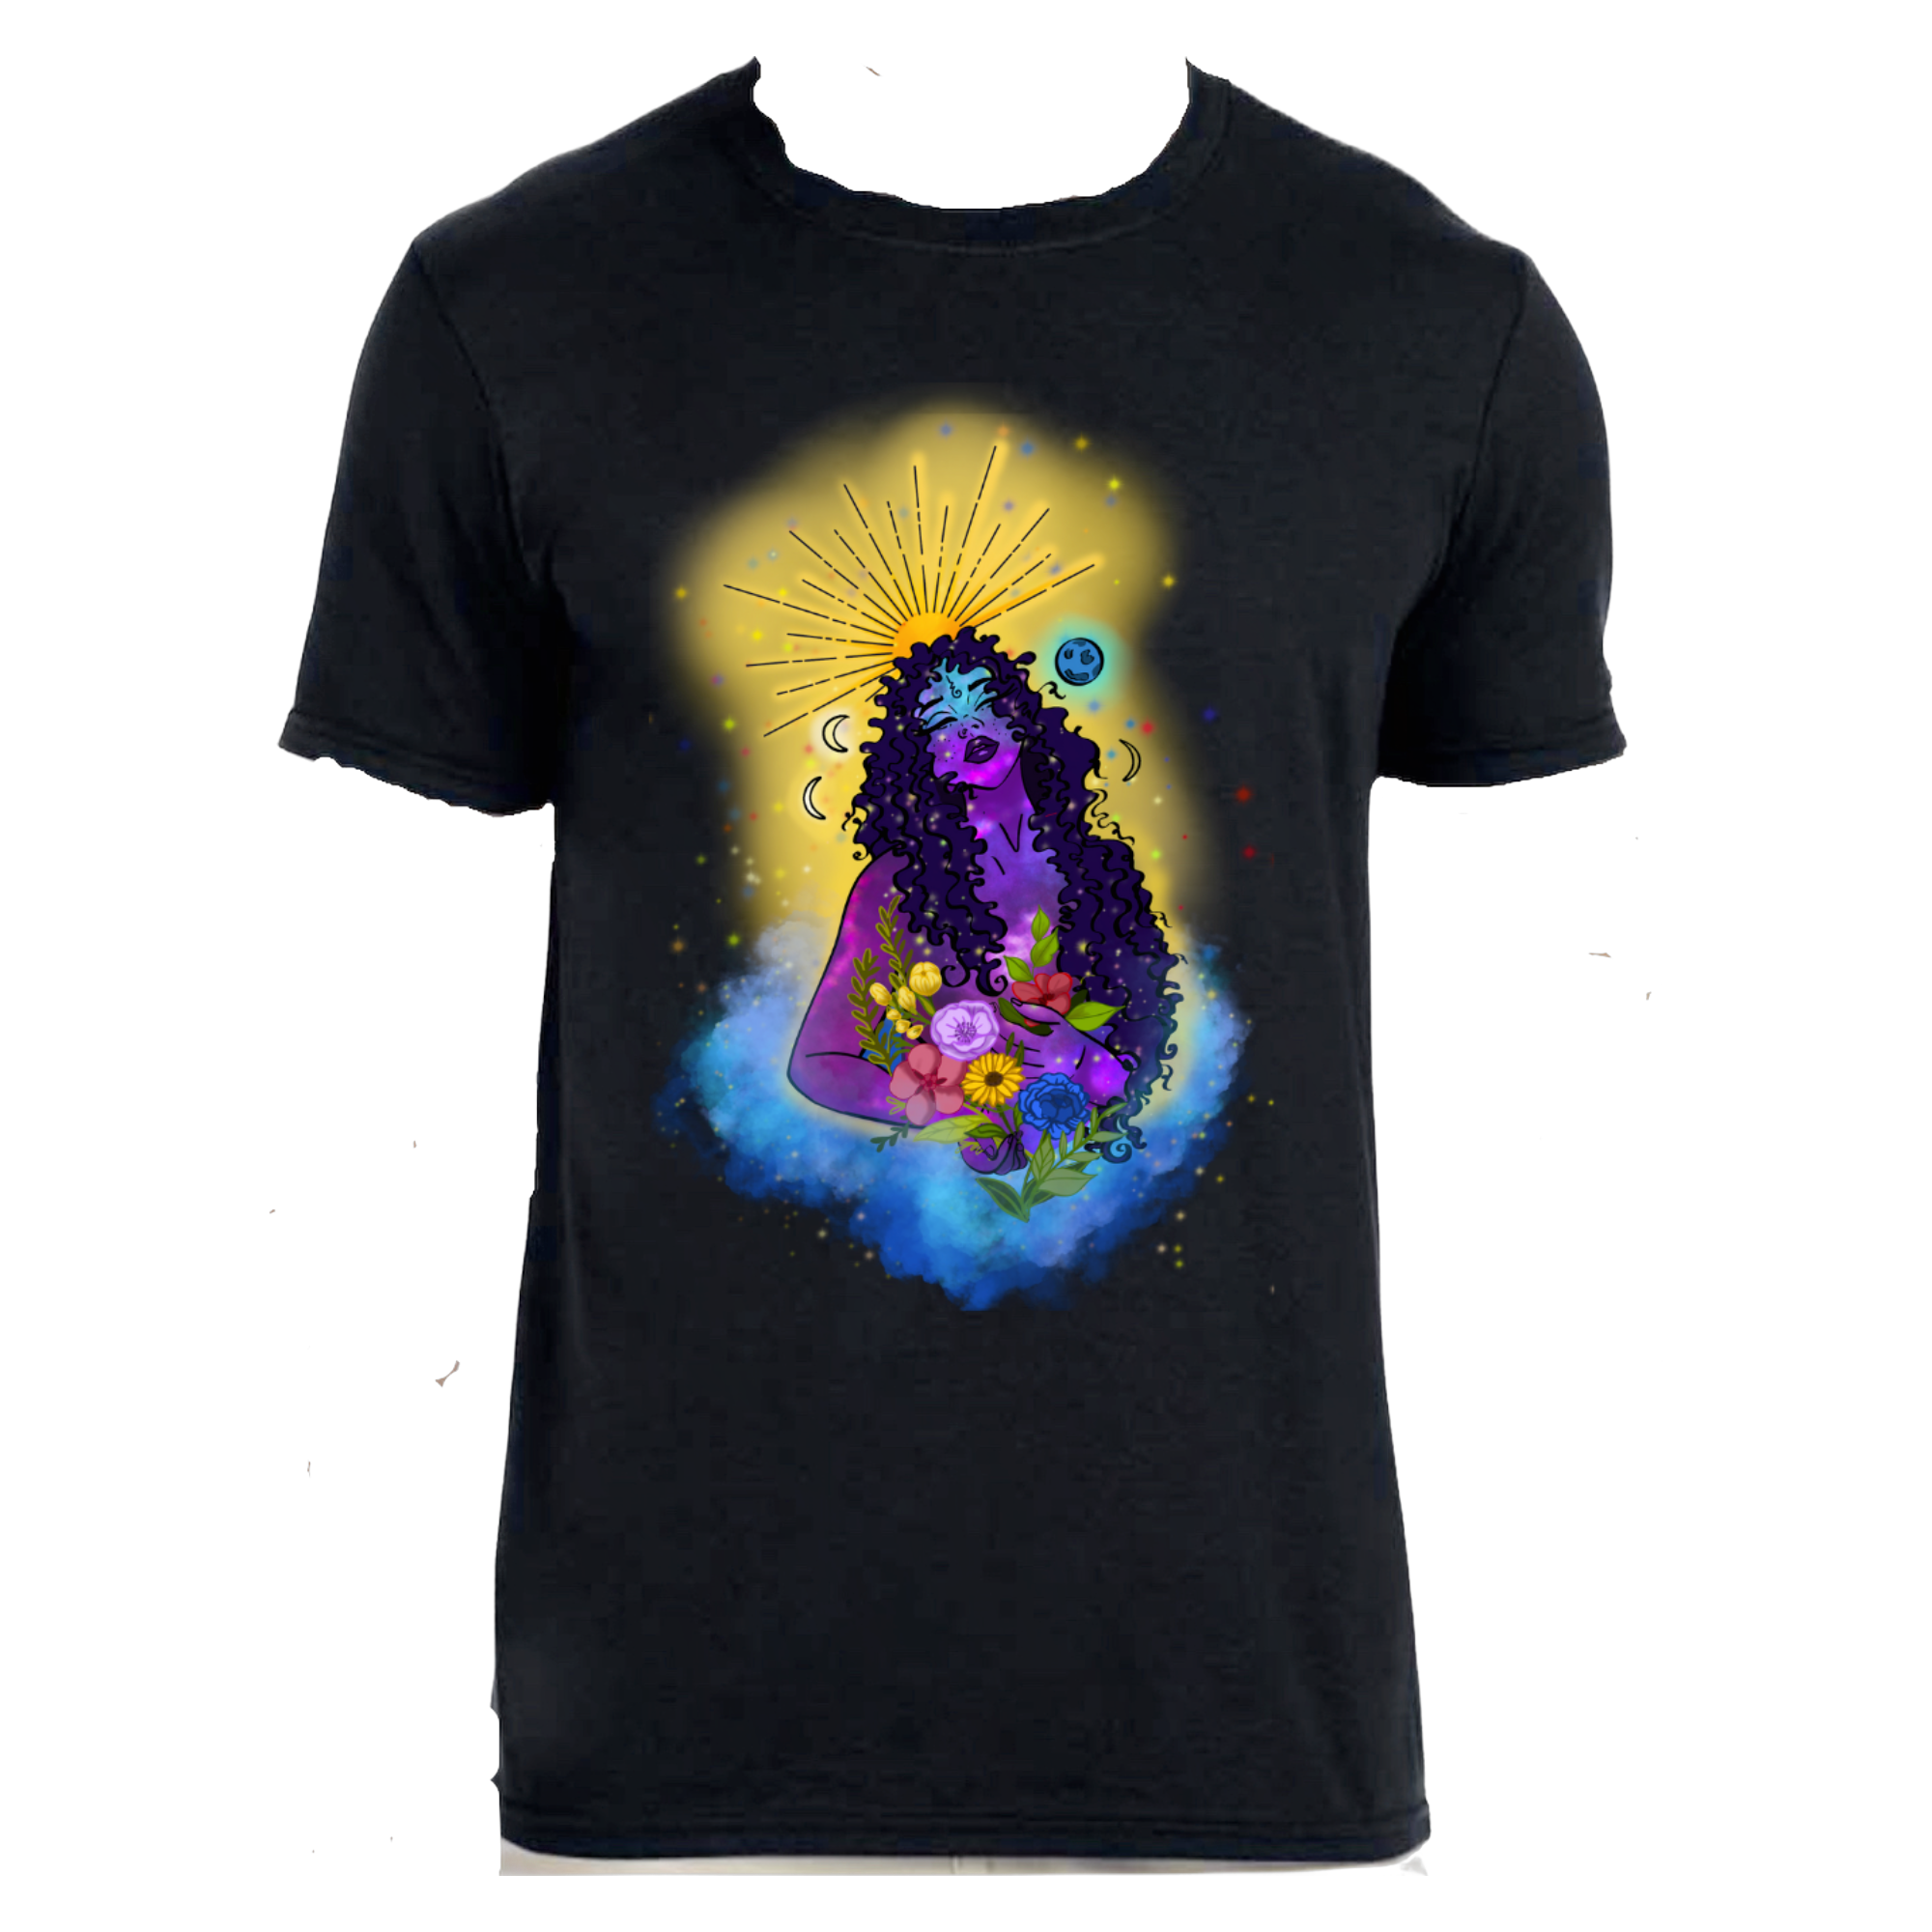 Cosmica black T-shirt product image 